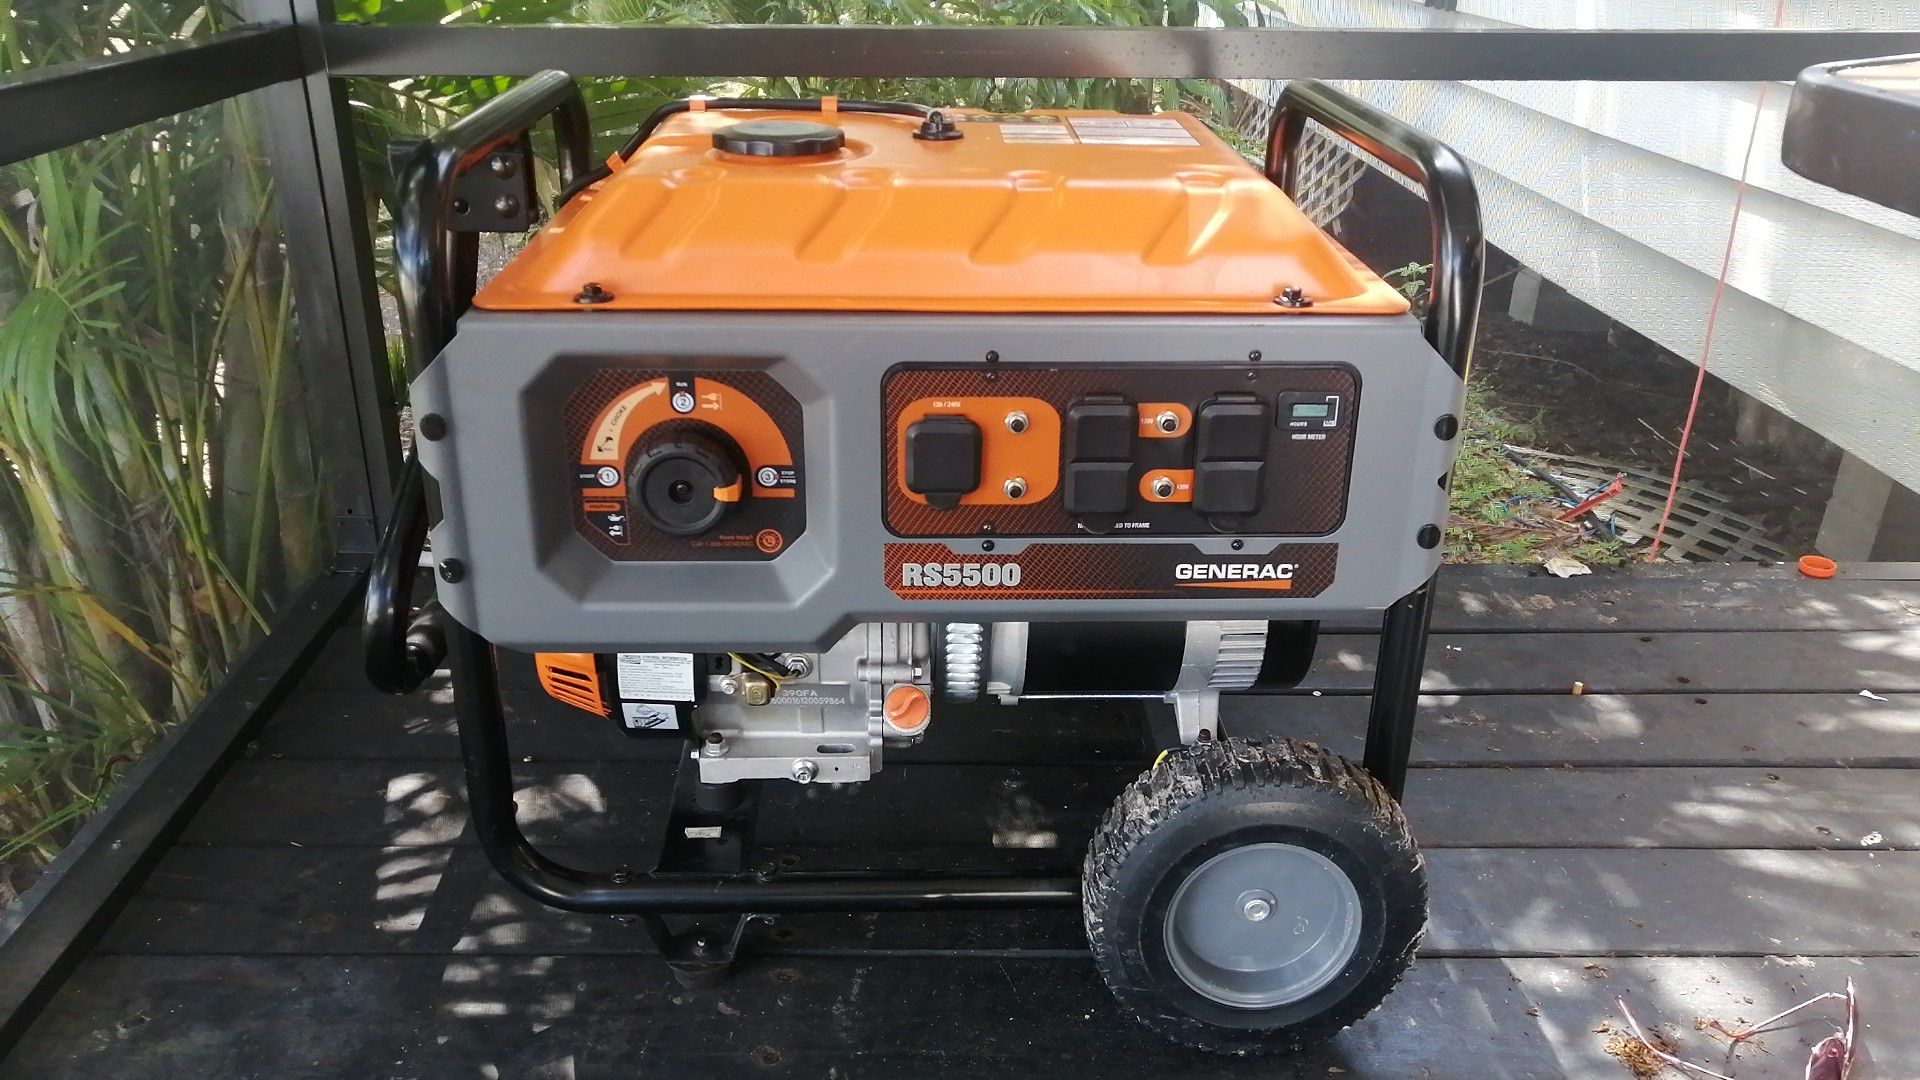 GENERAC Generator RS5500 Mint condition 140 hrs on it